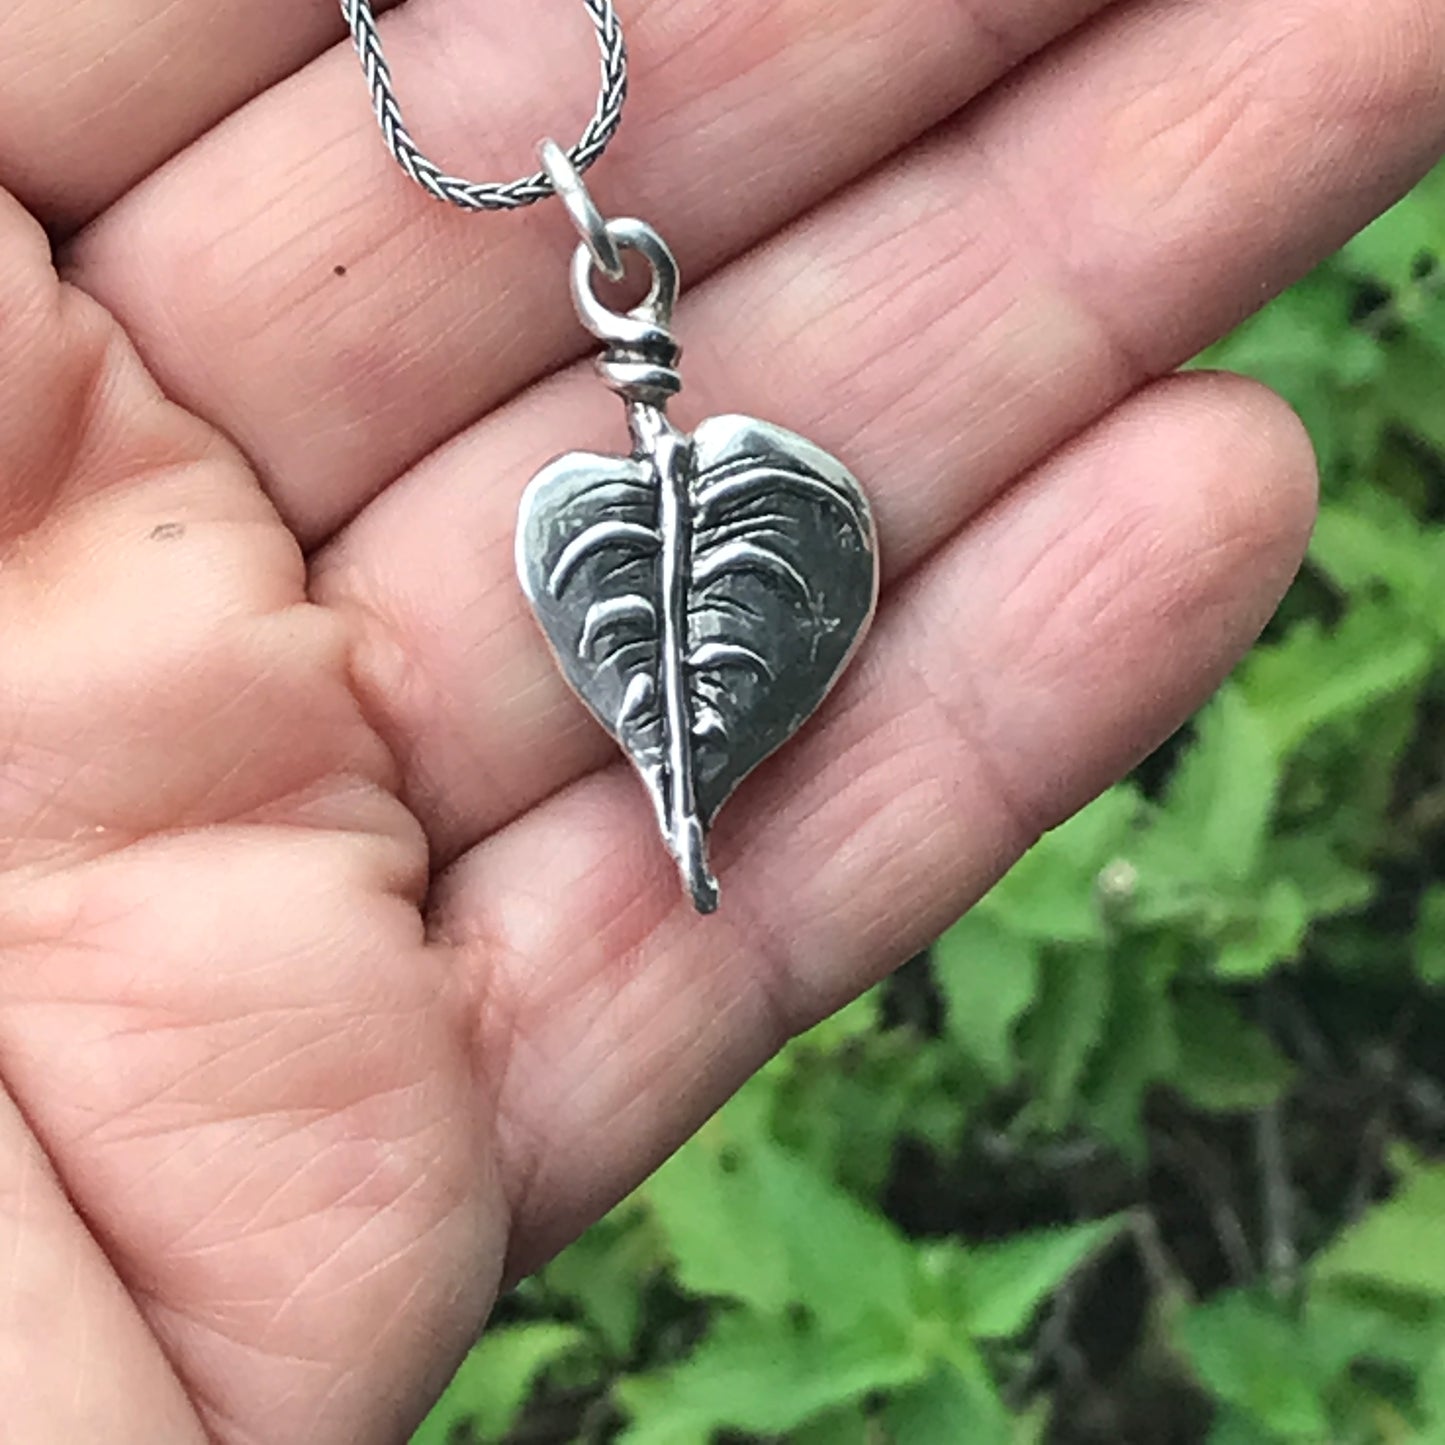 Bohdi leaf necklace Vermont donation pre-order ready in 2-3 weeks